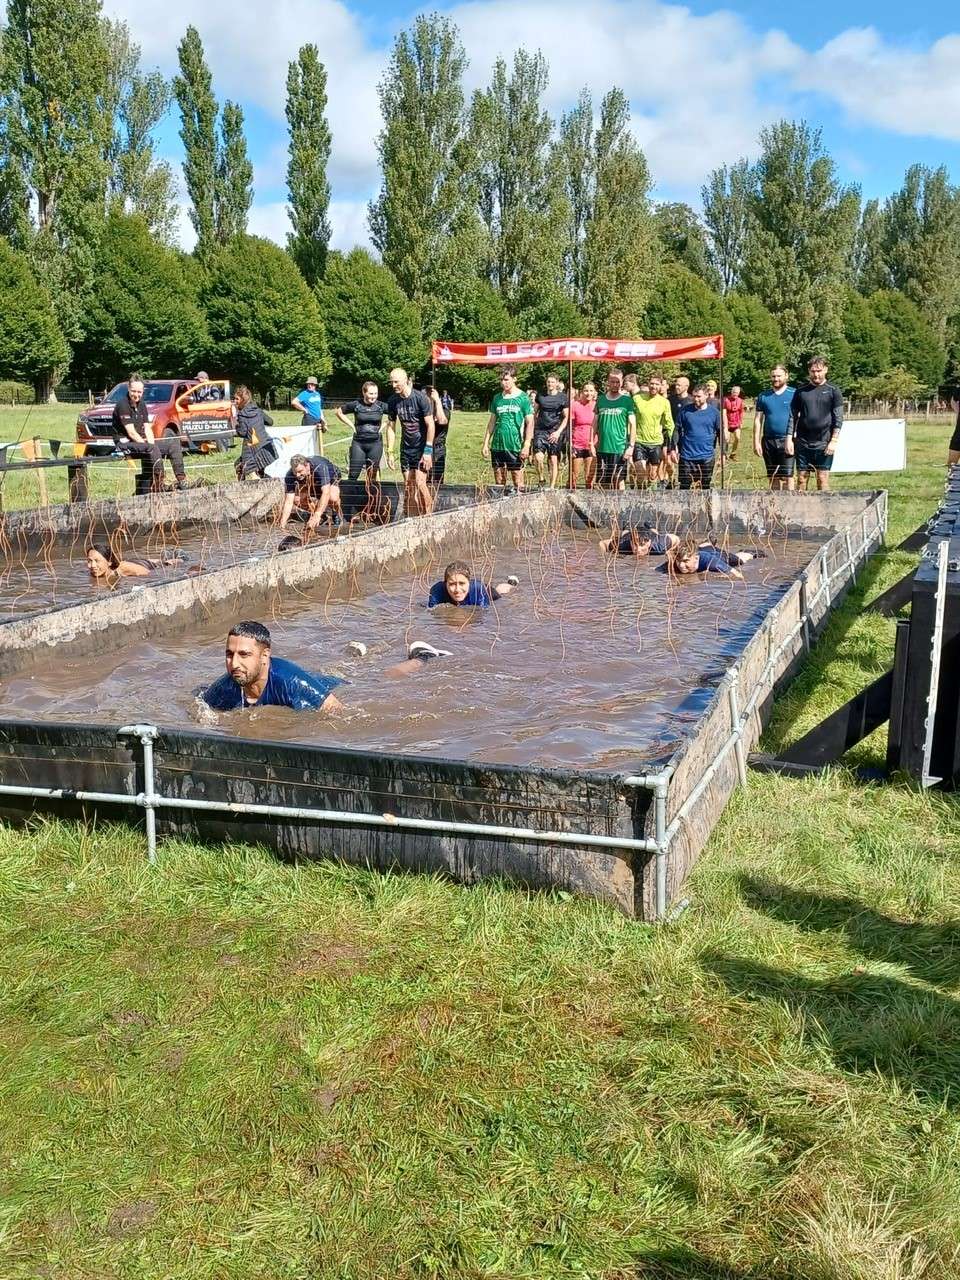 People crawling through a muddy water obstacle, with electric wires hanging down. There are trees and blue sky in the background.